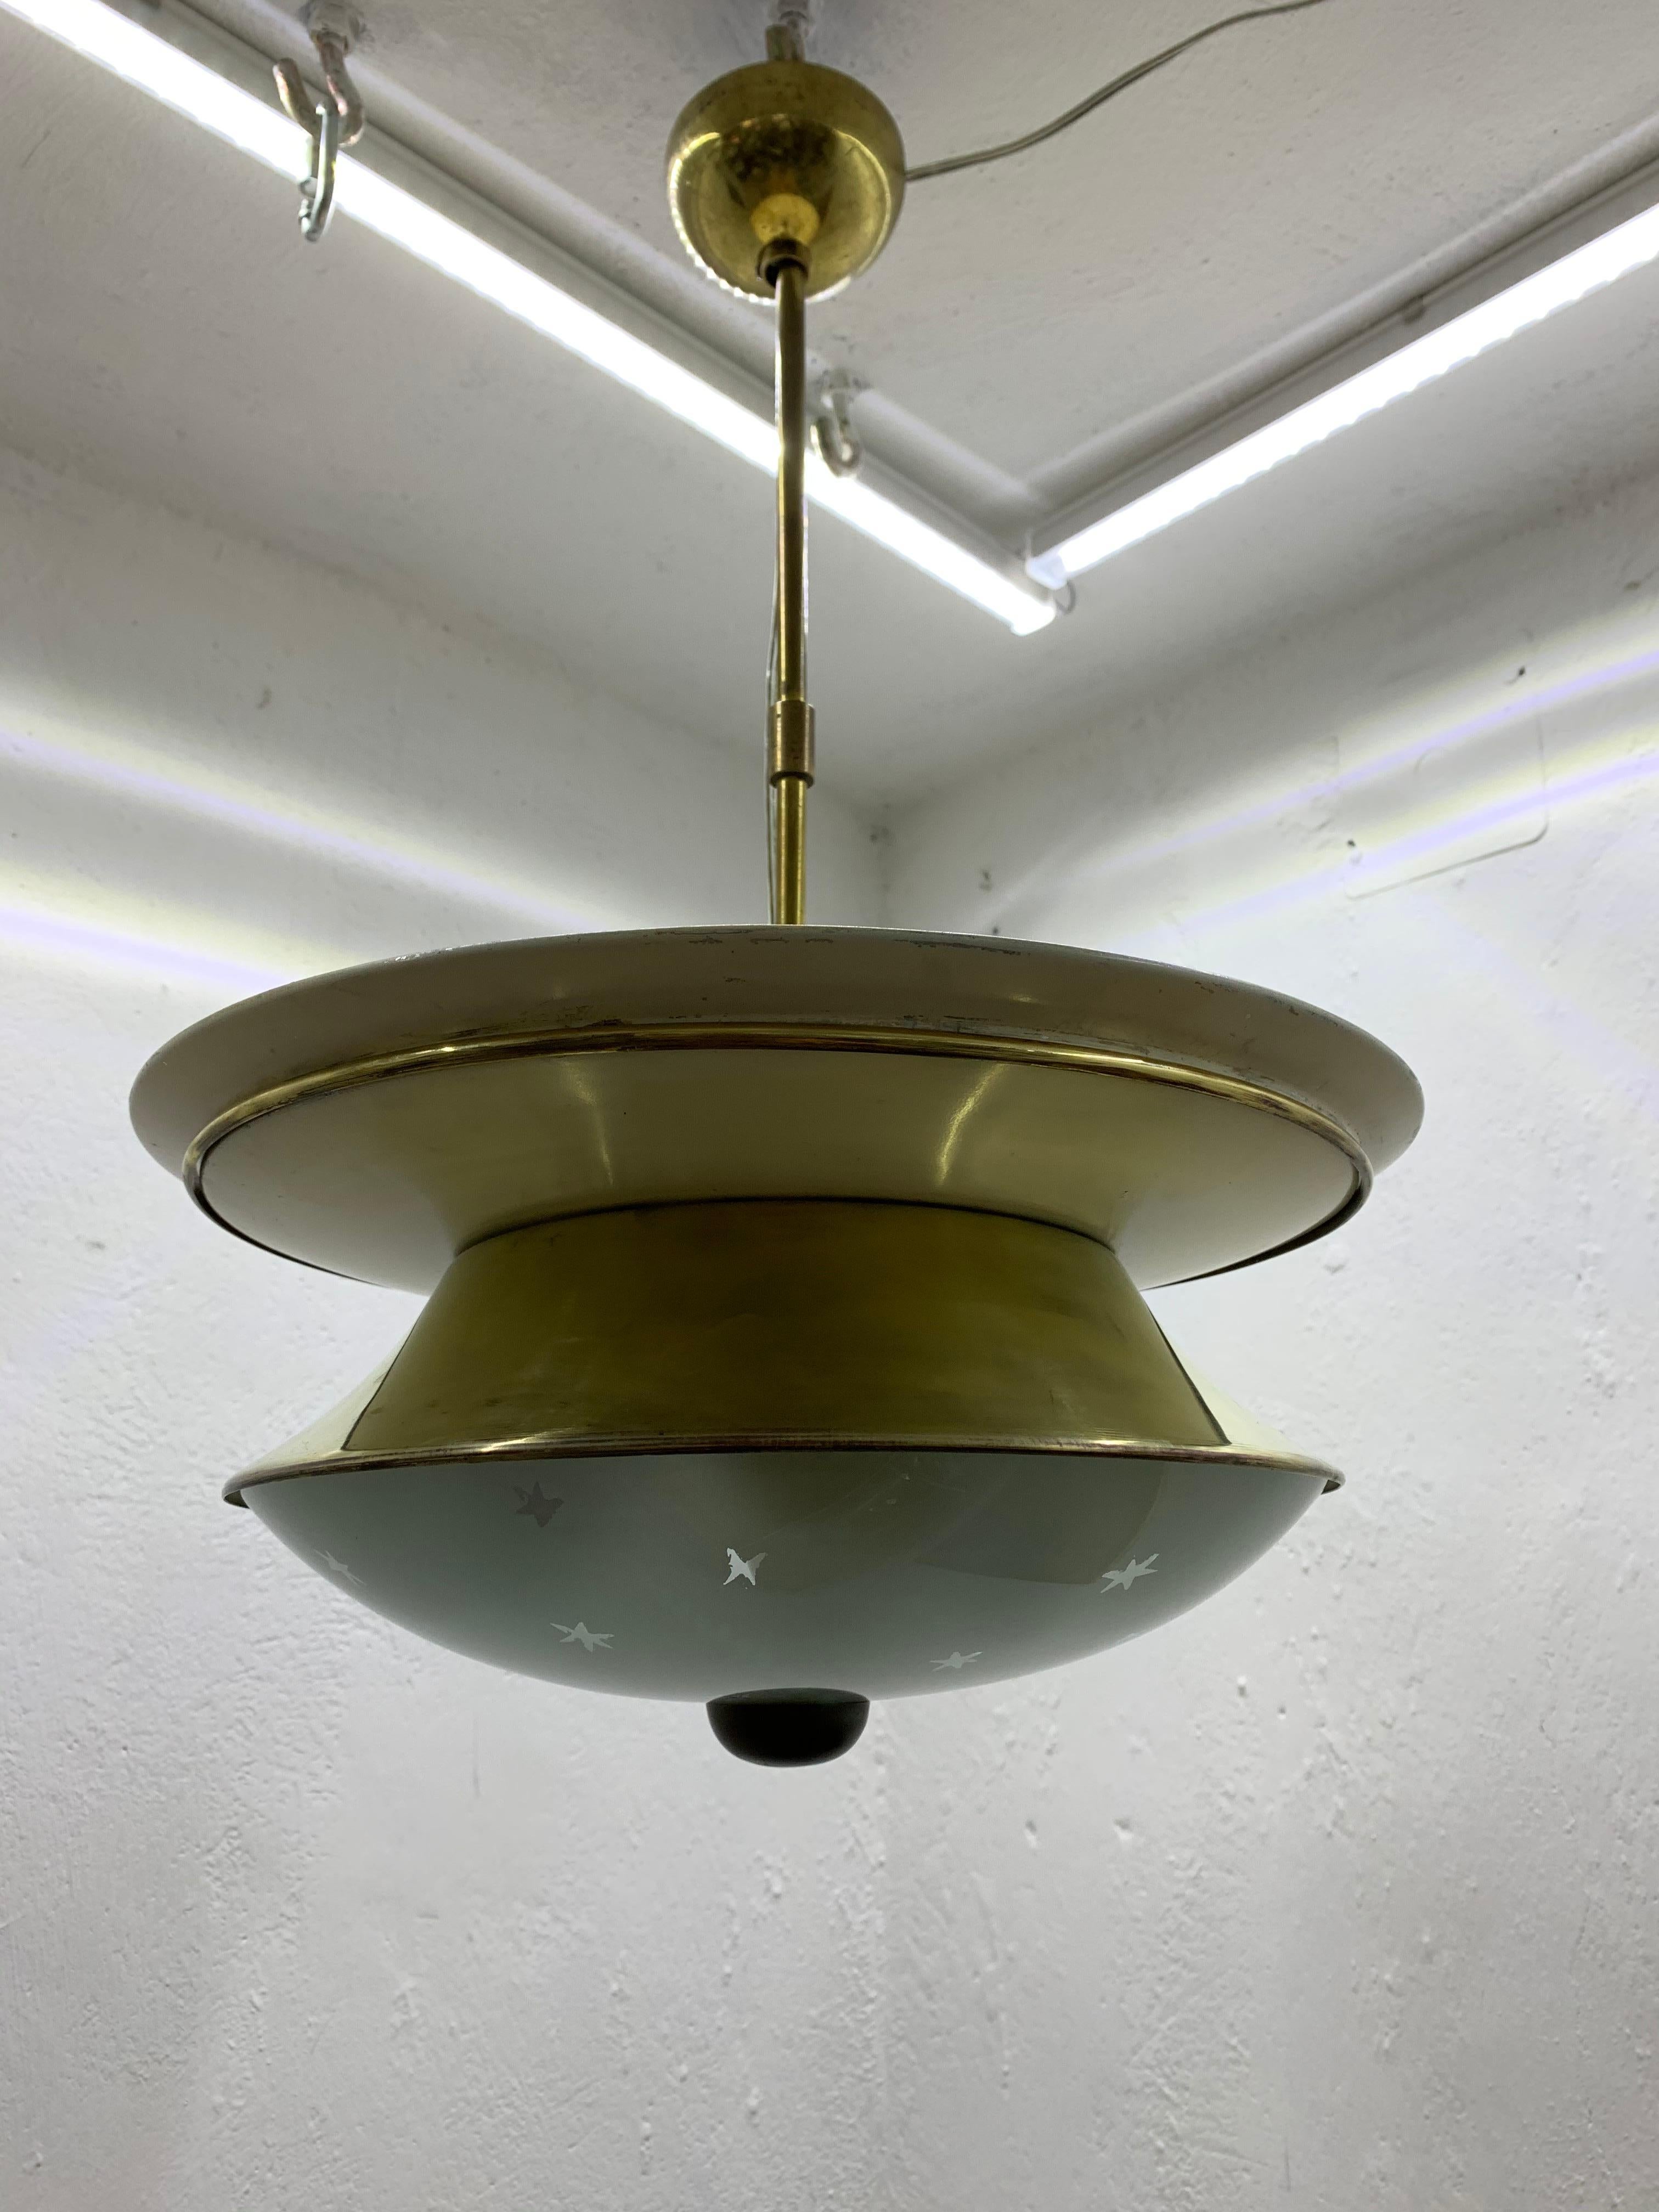 Mid-Century Modern 3 light chandelier attributed to Pietro Chiesa for Fontana Arte, 1950s.
Materials:
Brass,
Lacquered metal
Glass

The height of this chandelier can easily be adjusted to longer with a brass rod or also converted into a flush